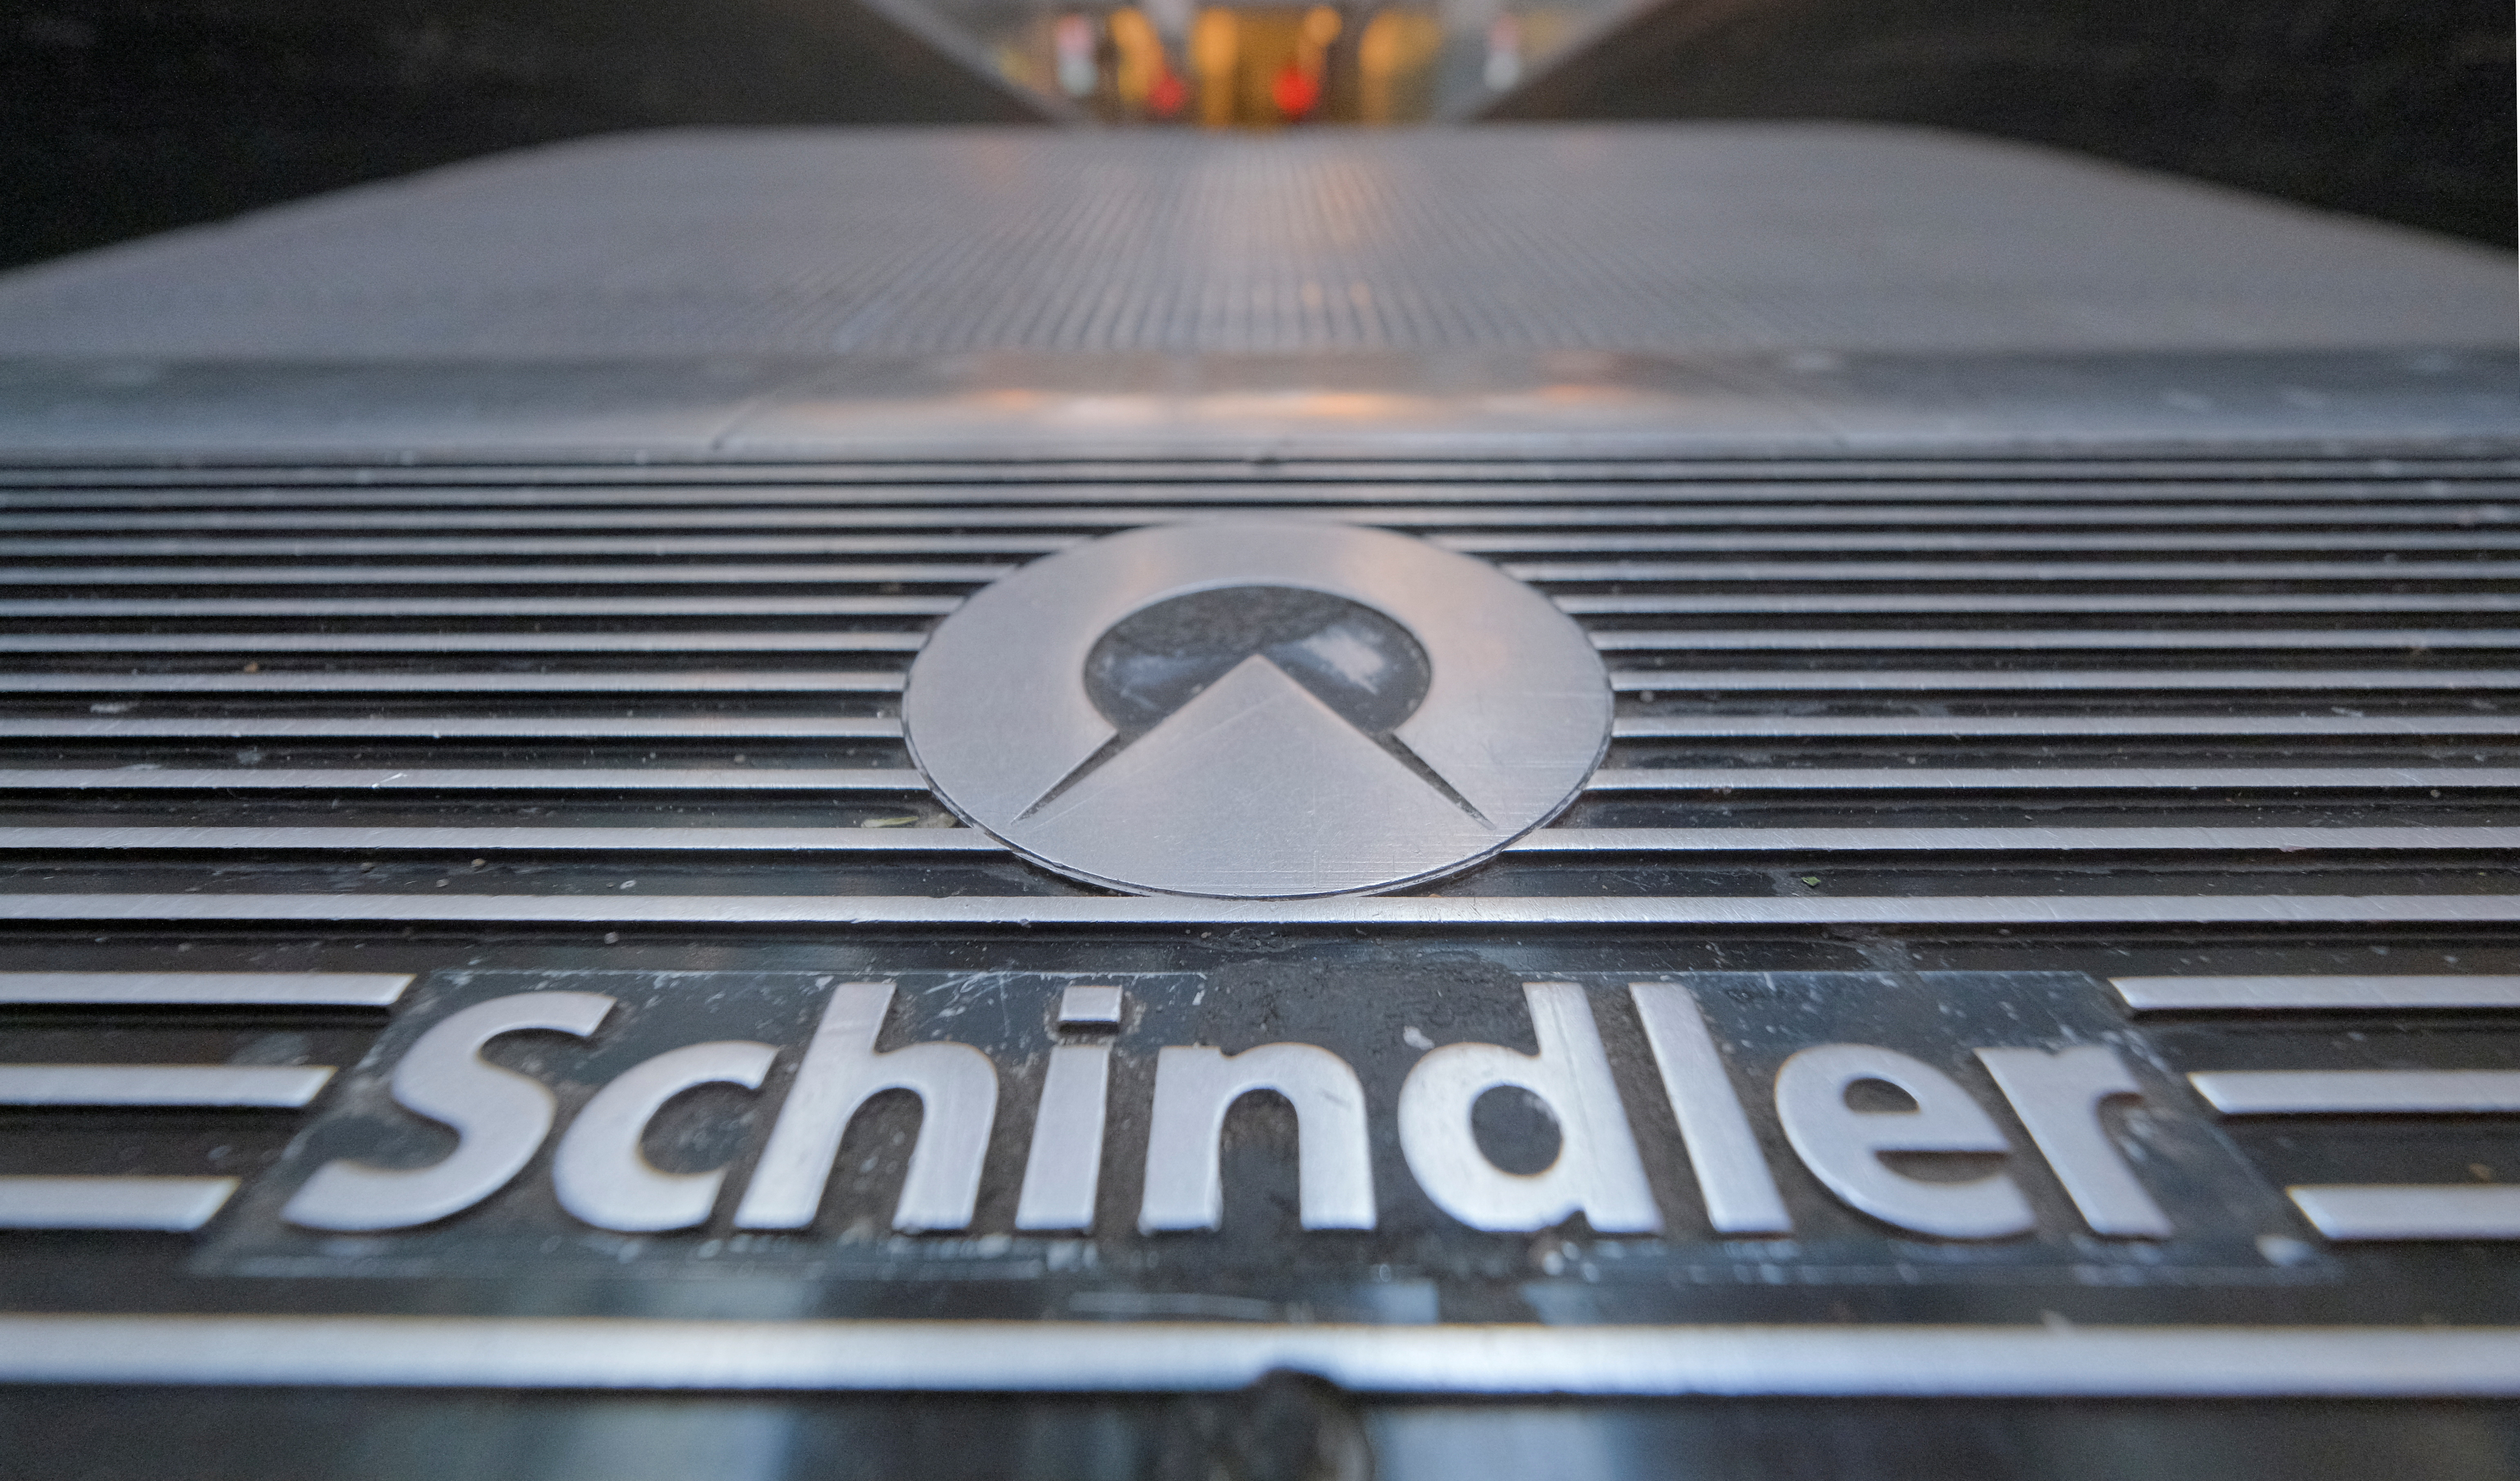 A moving stairway of Swiss elevator maker Schindler is pictured at a mall in Neuss